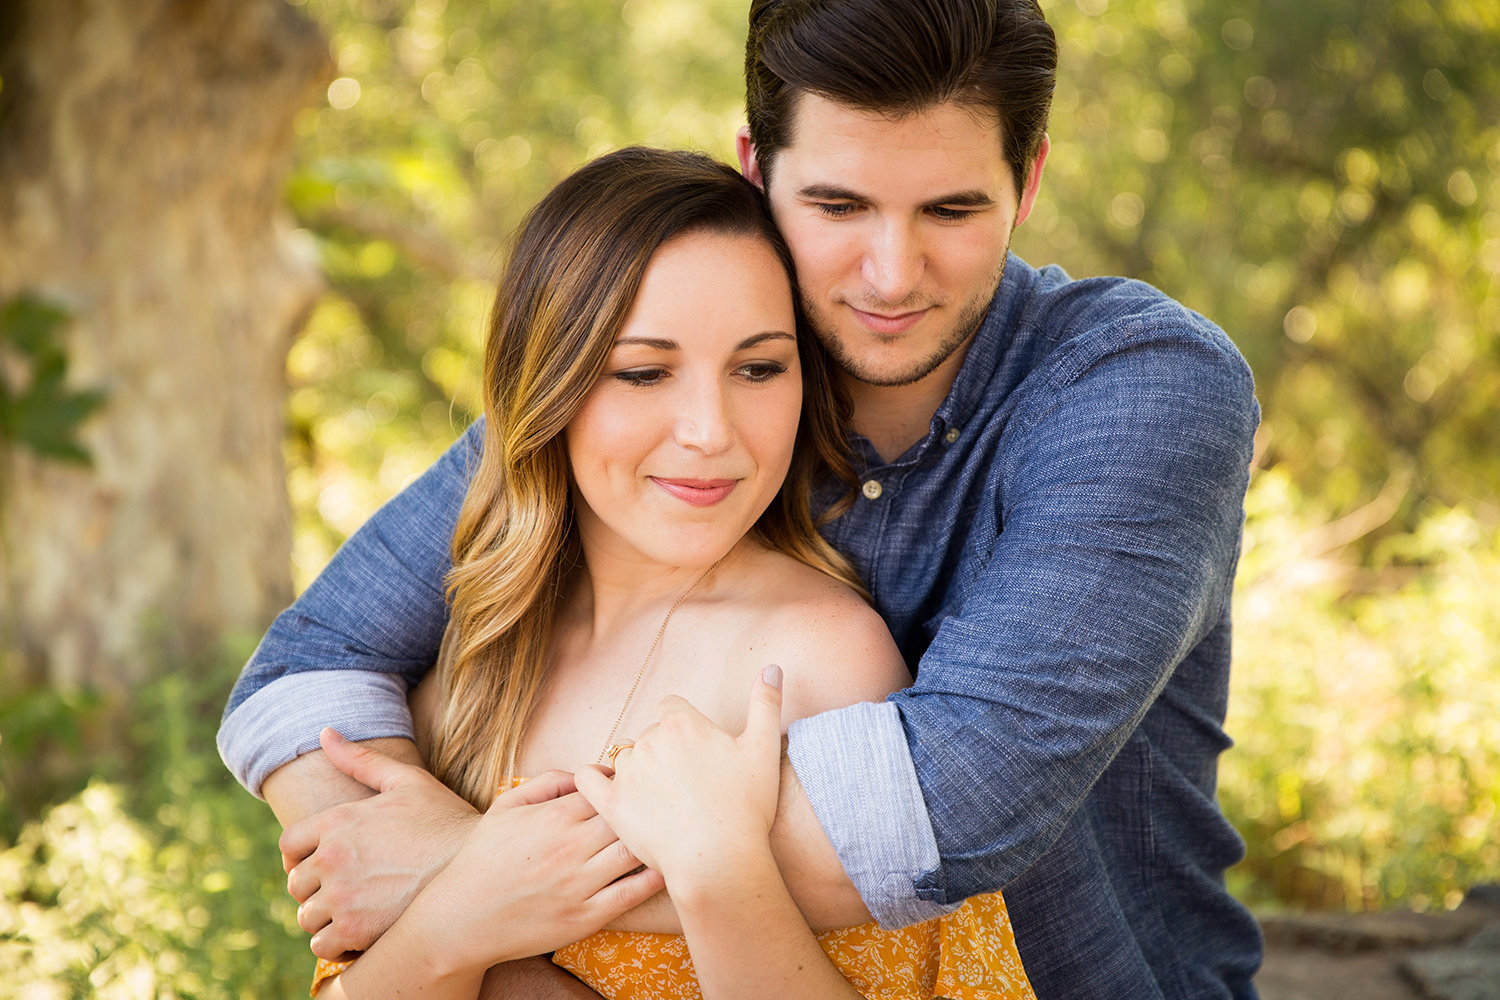 Daley Ranch engagement photos gorgeous outdoor photos